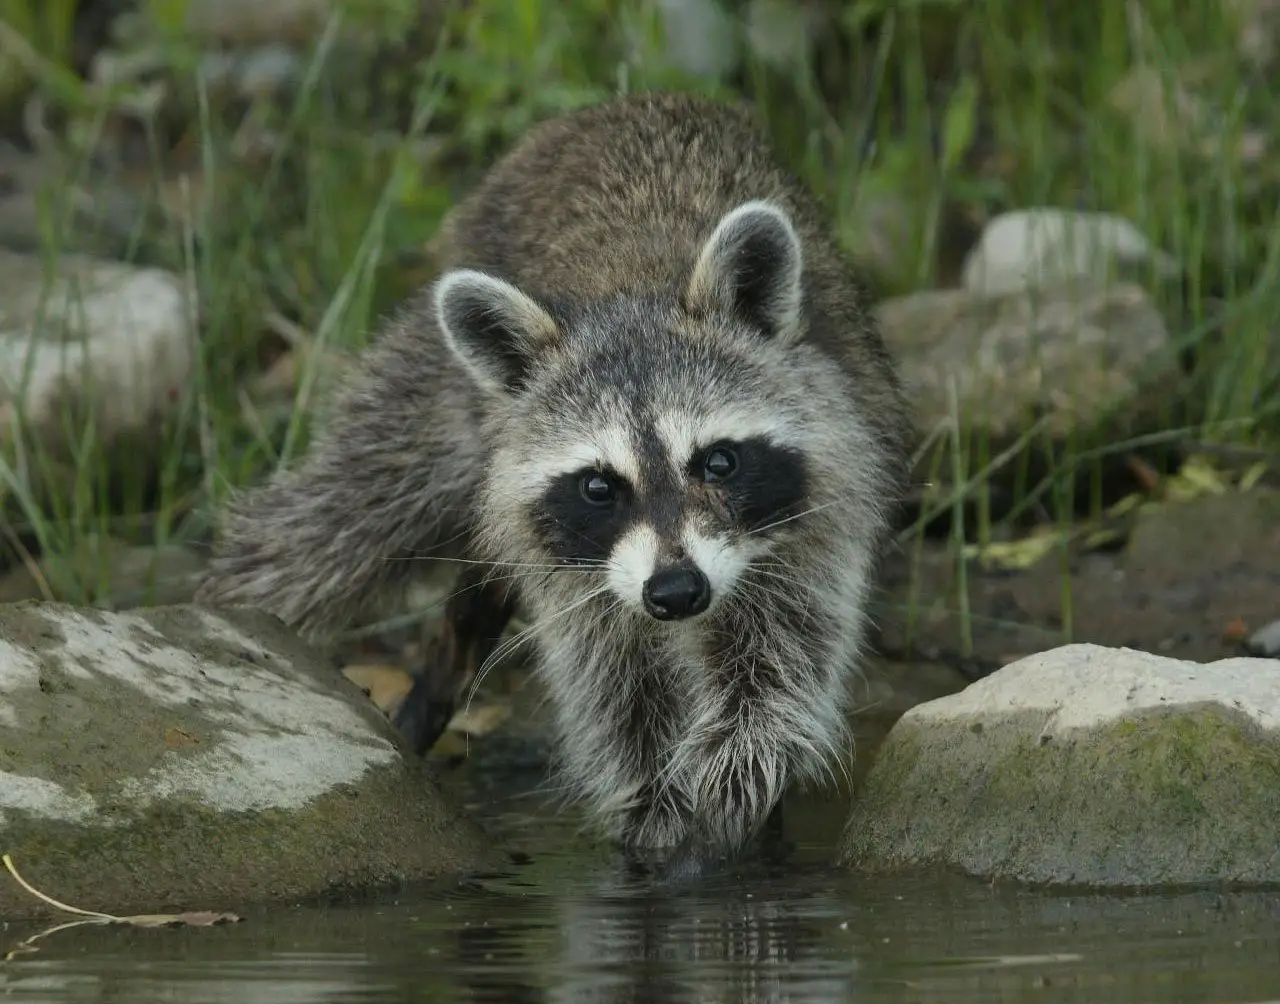 Northern Racoon - The Animal Facts - Appearance, Diet, Habitat, Behavior